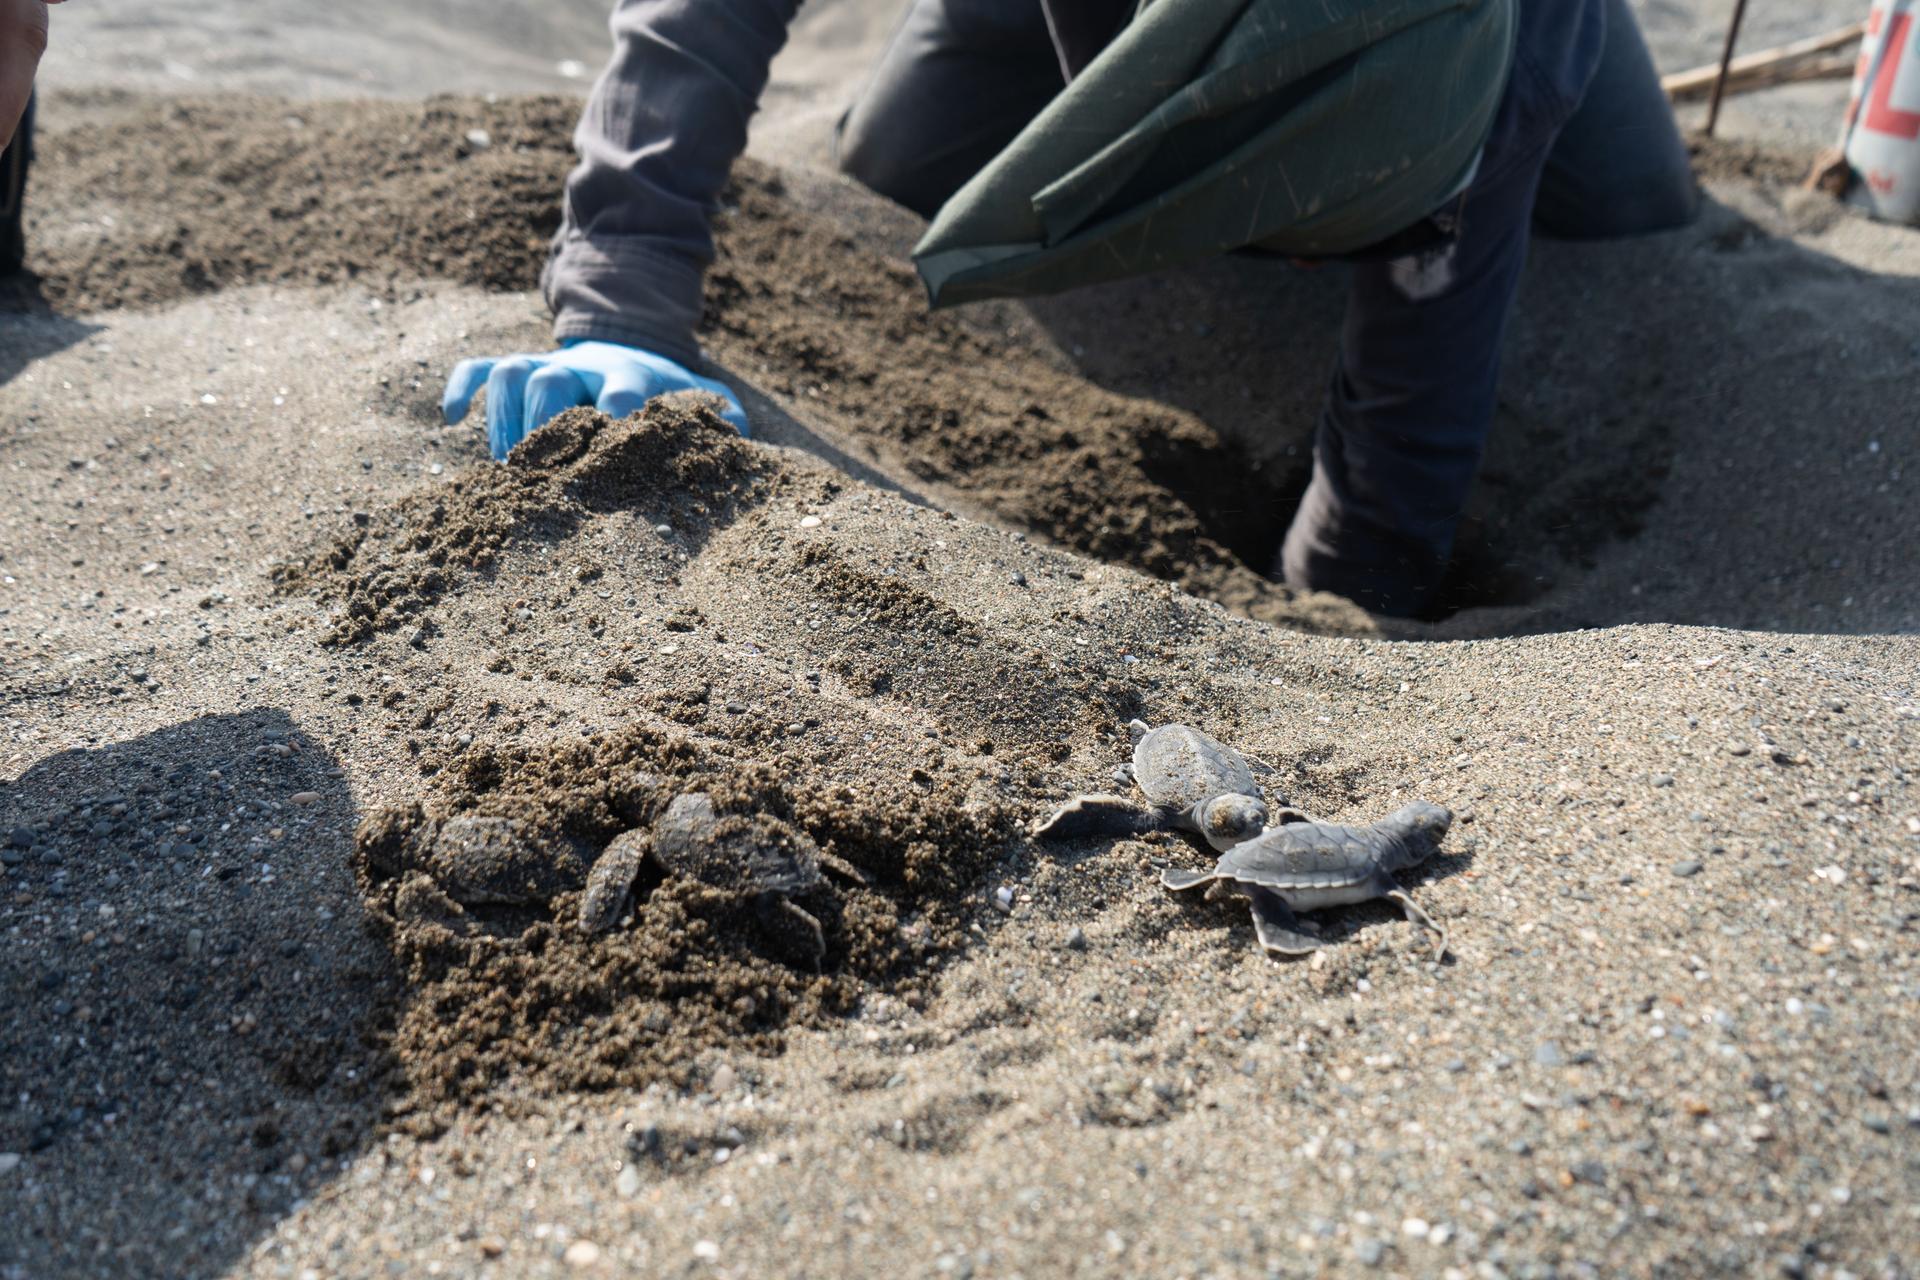 Environmentalists help hatching sea turtles reach the surface on Samandağ Beach, just a few meters from a large dump site for earthquake debris.